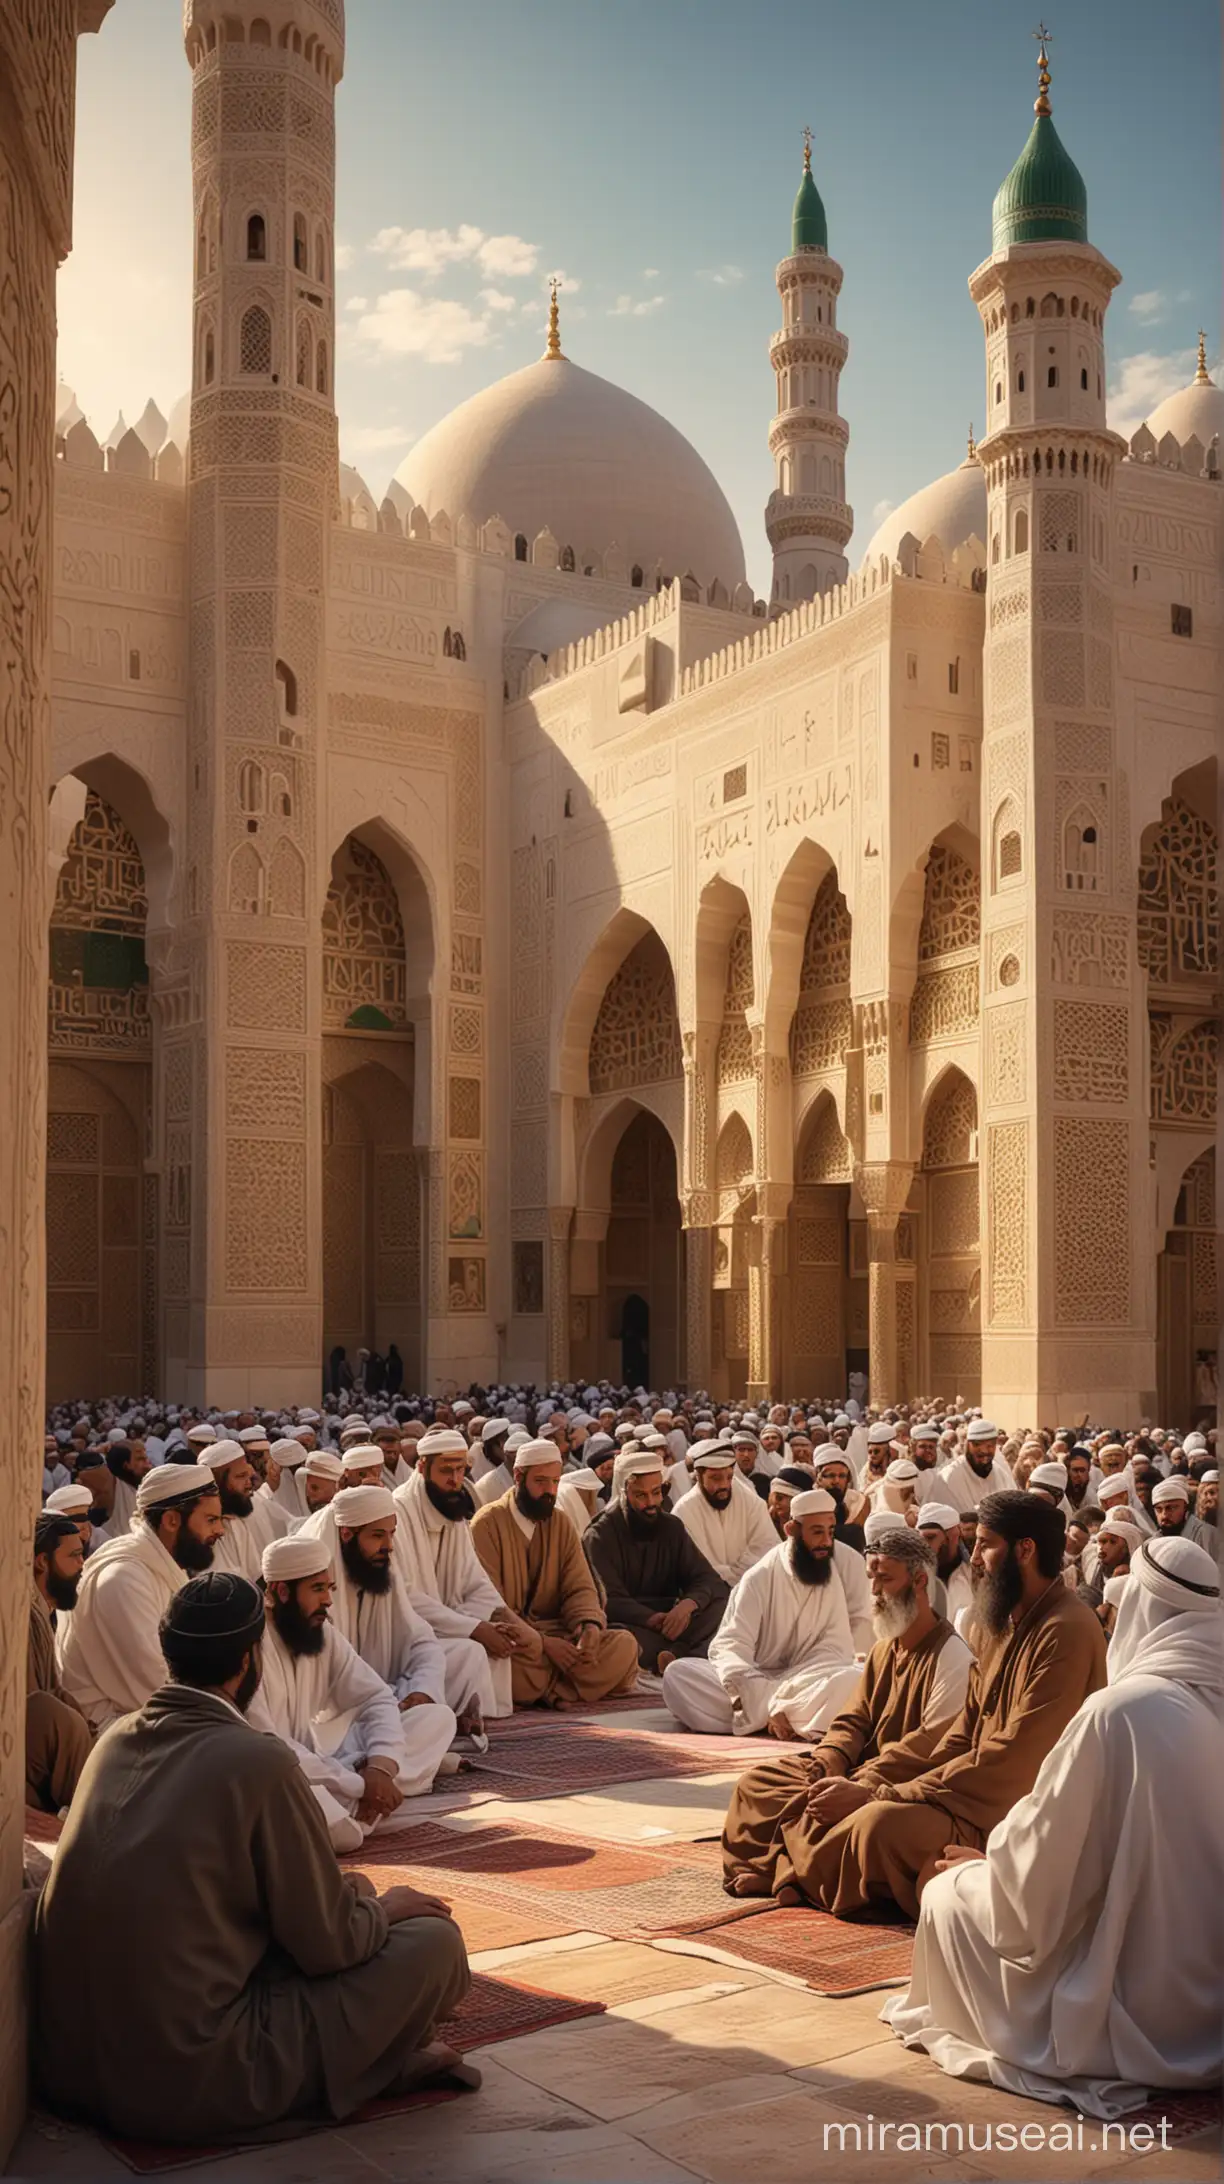 An image of Muhammad, the Prophet of Islam, sitting with his companions in the serene surroundings of Medina, imparting words of wisdom and guidance, 4K HD with islamic tradition